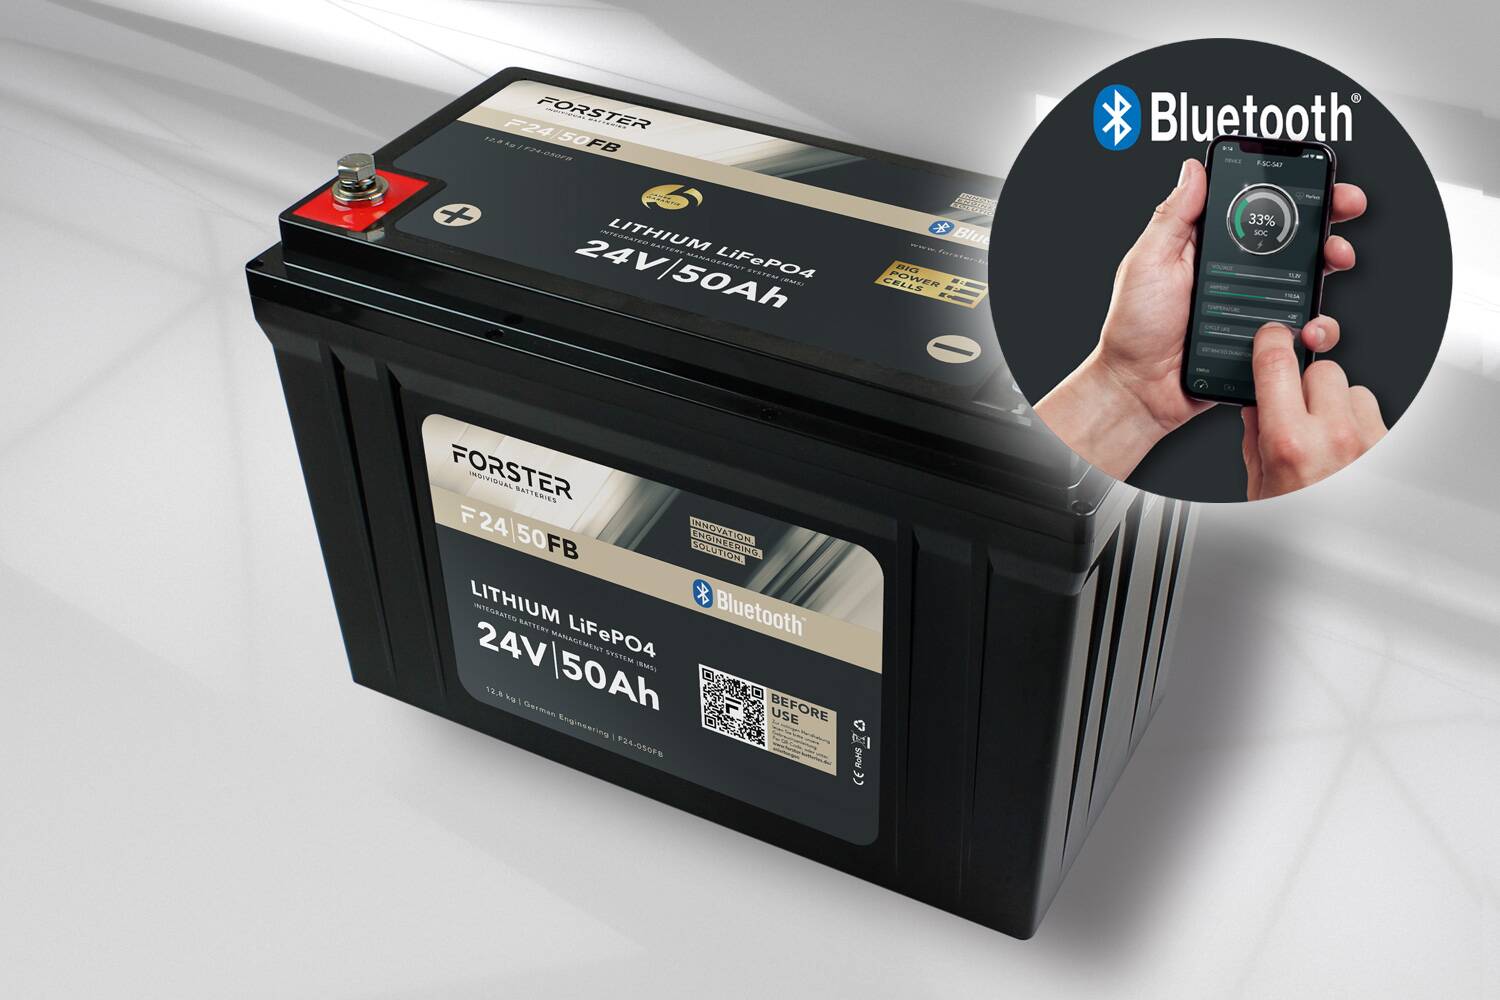 24 V 50 Ah Forster Fishing Battery with Bluetooth